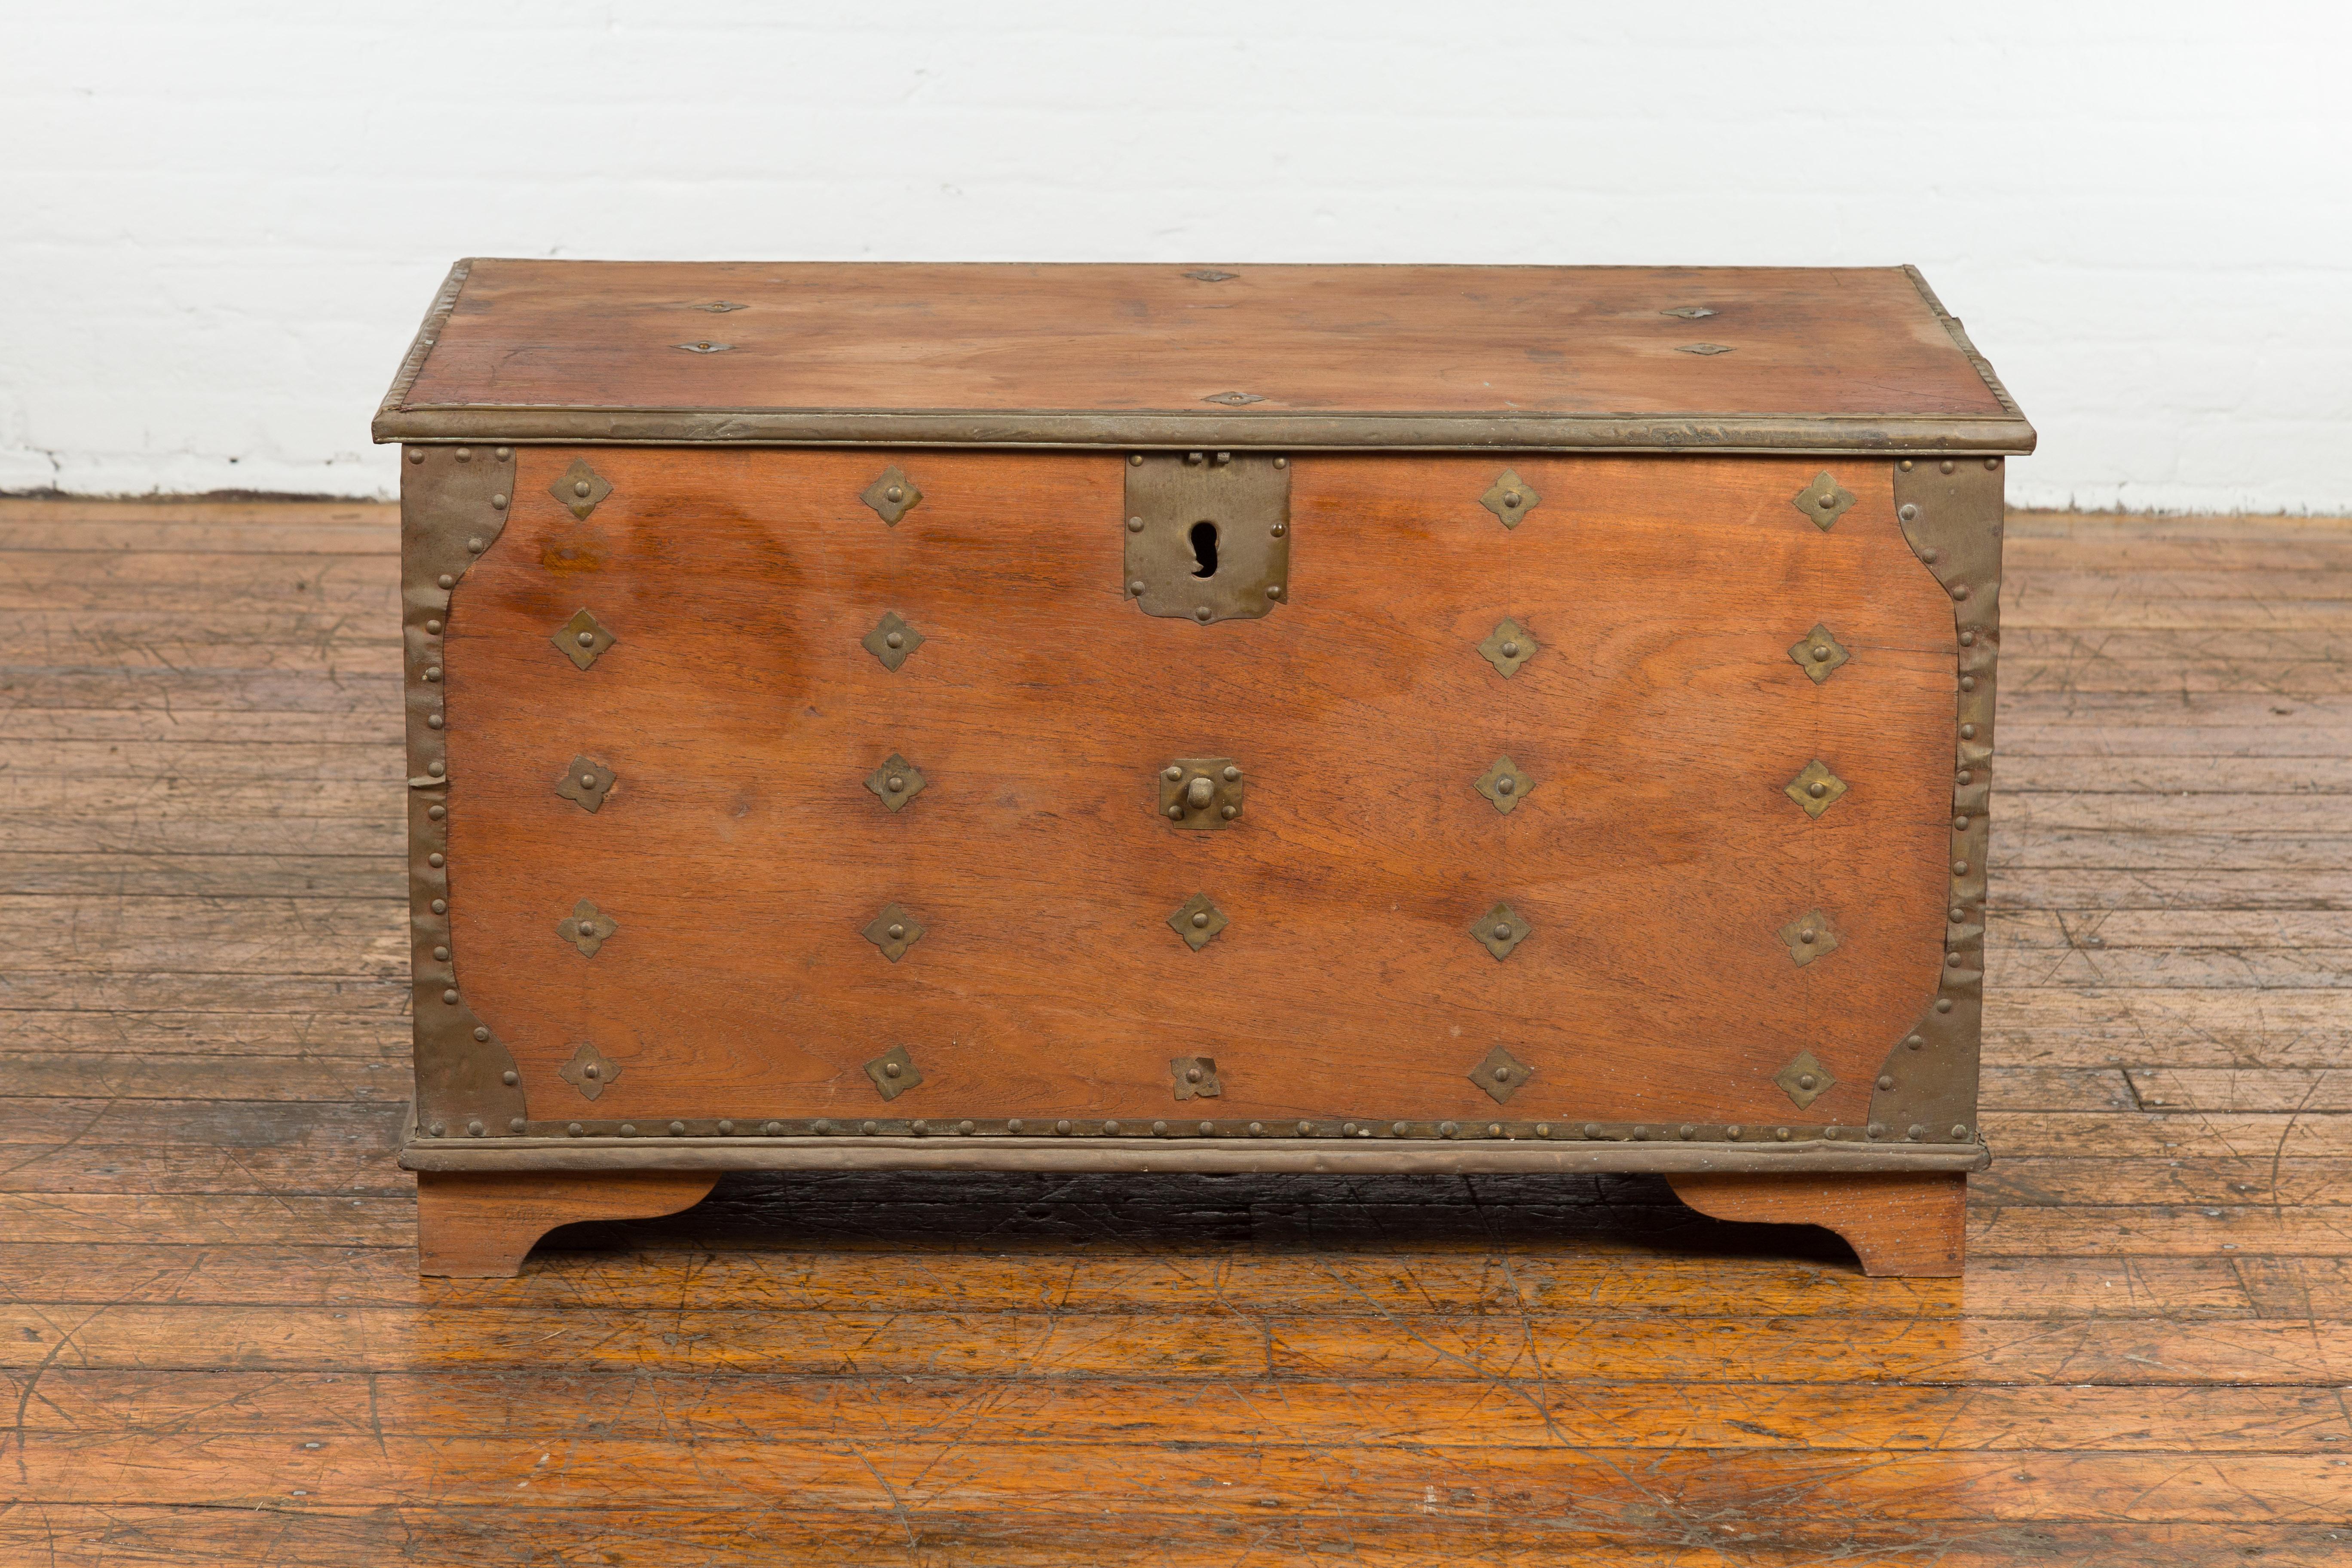 An Indonesian rustic blanket chest from the 19th century, with brass details and hidden storage box. Created in Indonesia during the 19th century, this blanket chest captures the attention with its brass accentuation and great rustic character. The